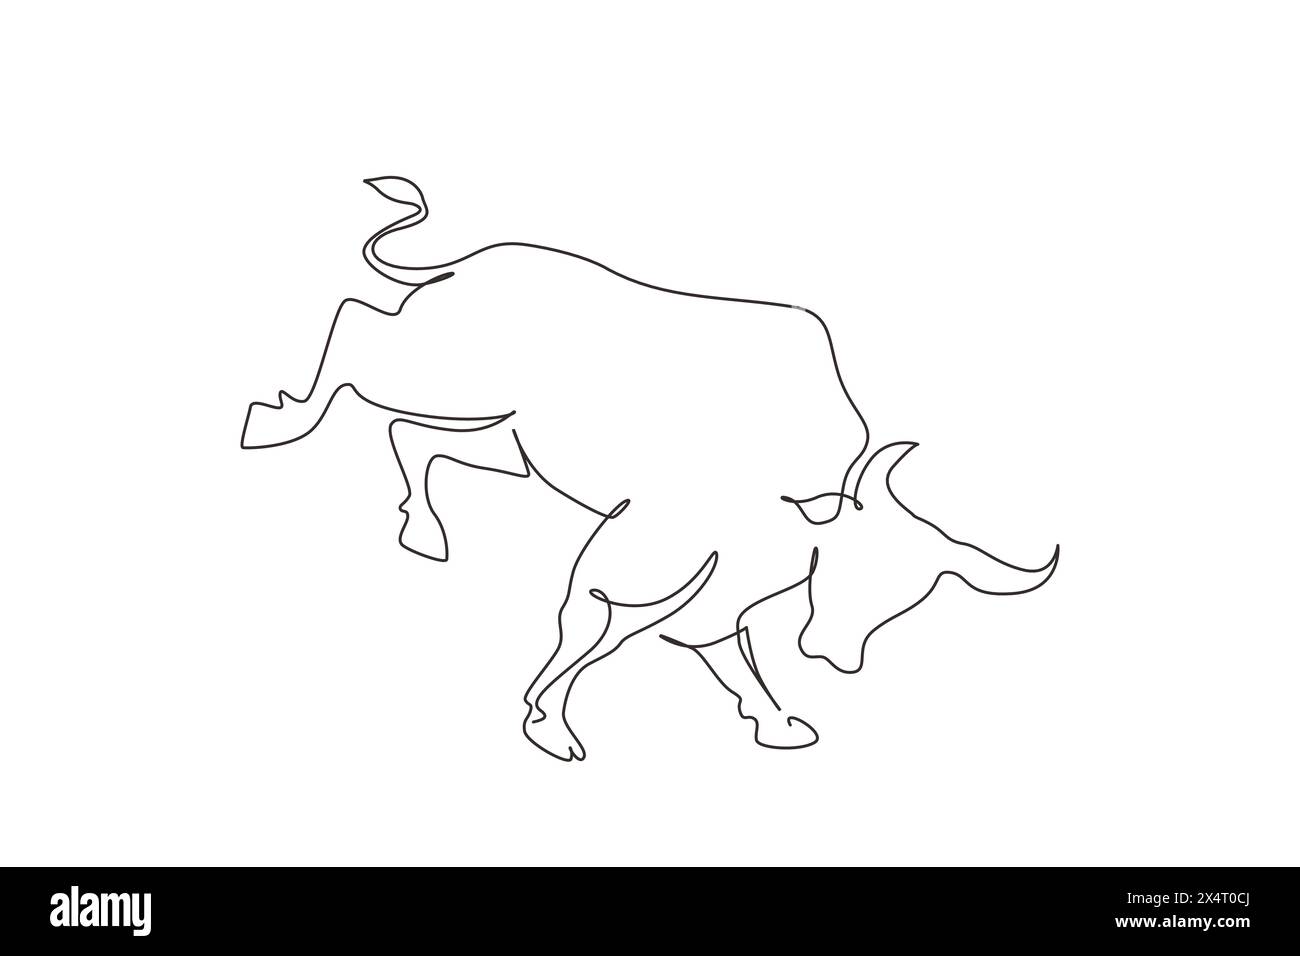 Single continuous line drawing wild bull attack. Elegance buffalo for conservation national park logo identity. Big strong bull mascot concept for rod Stock Vector